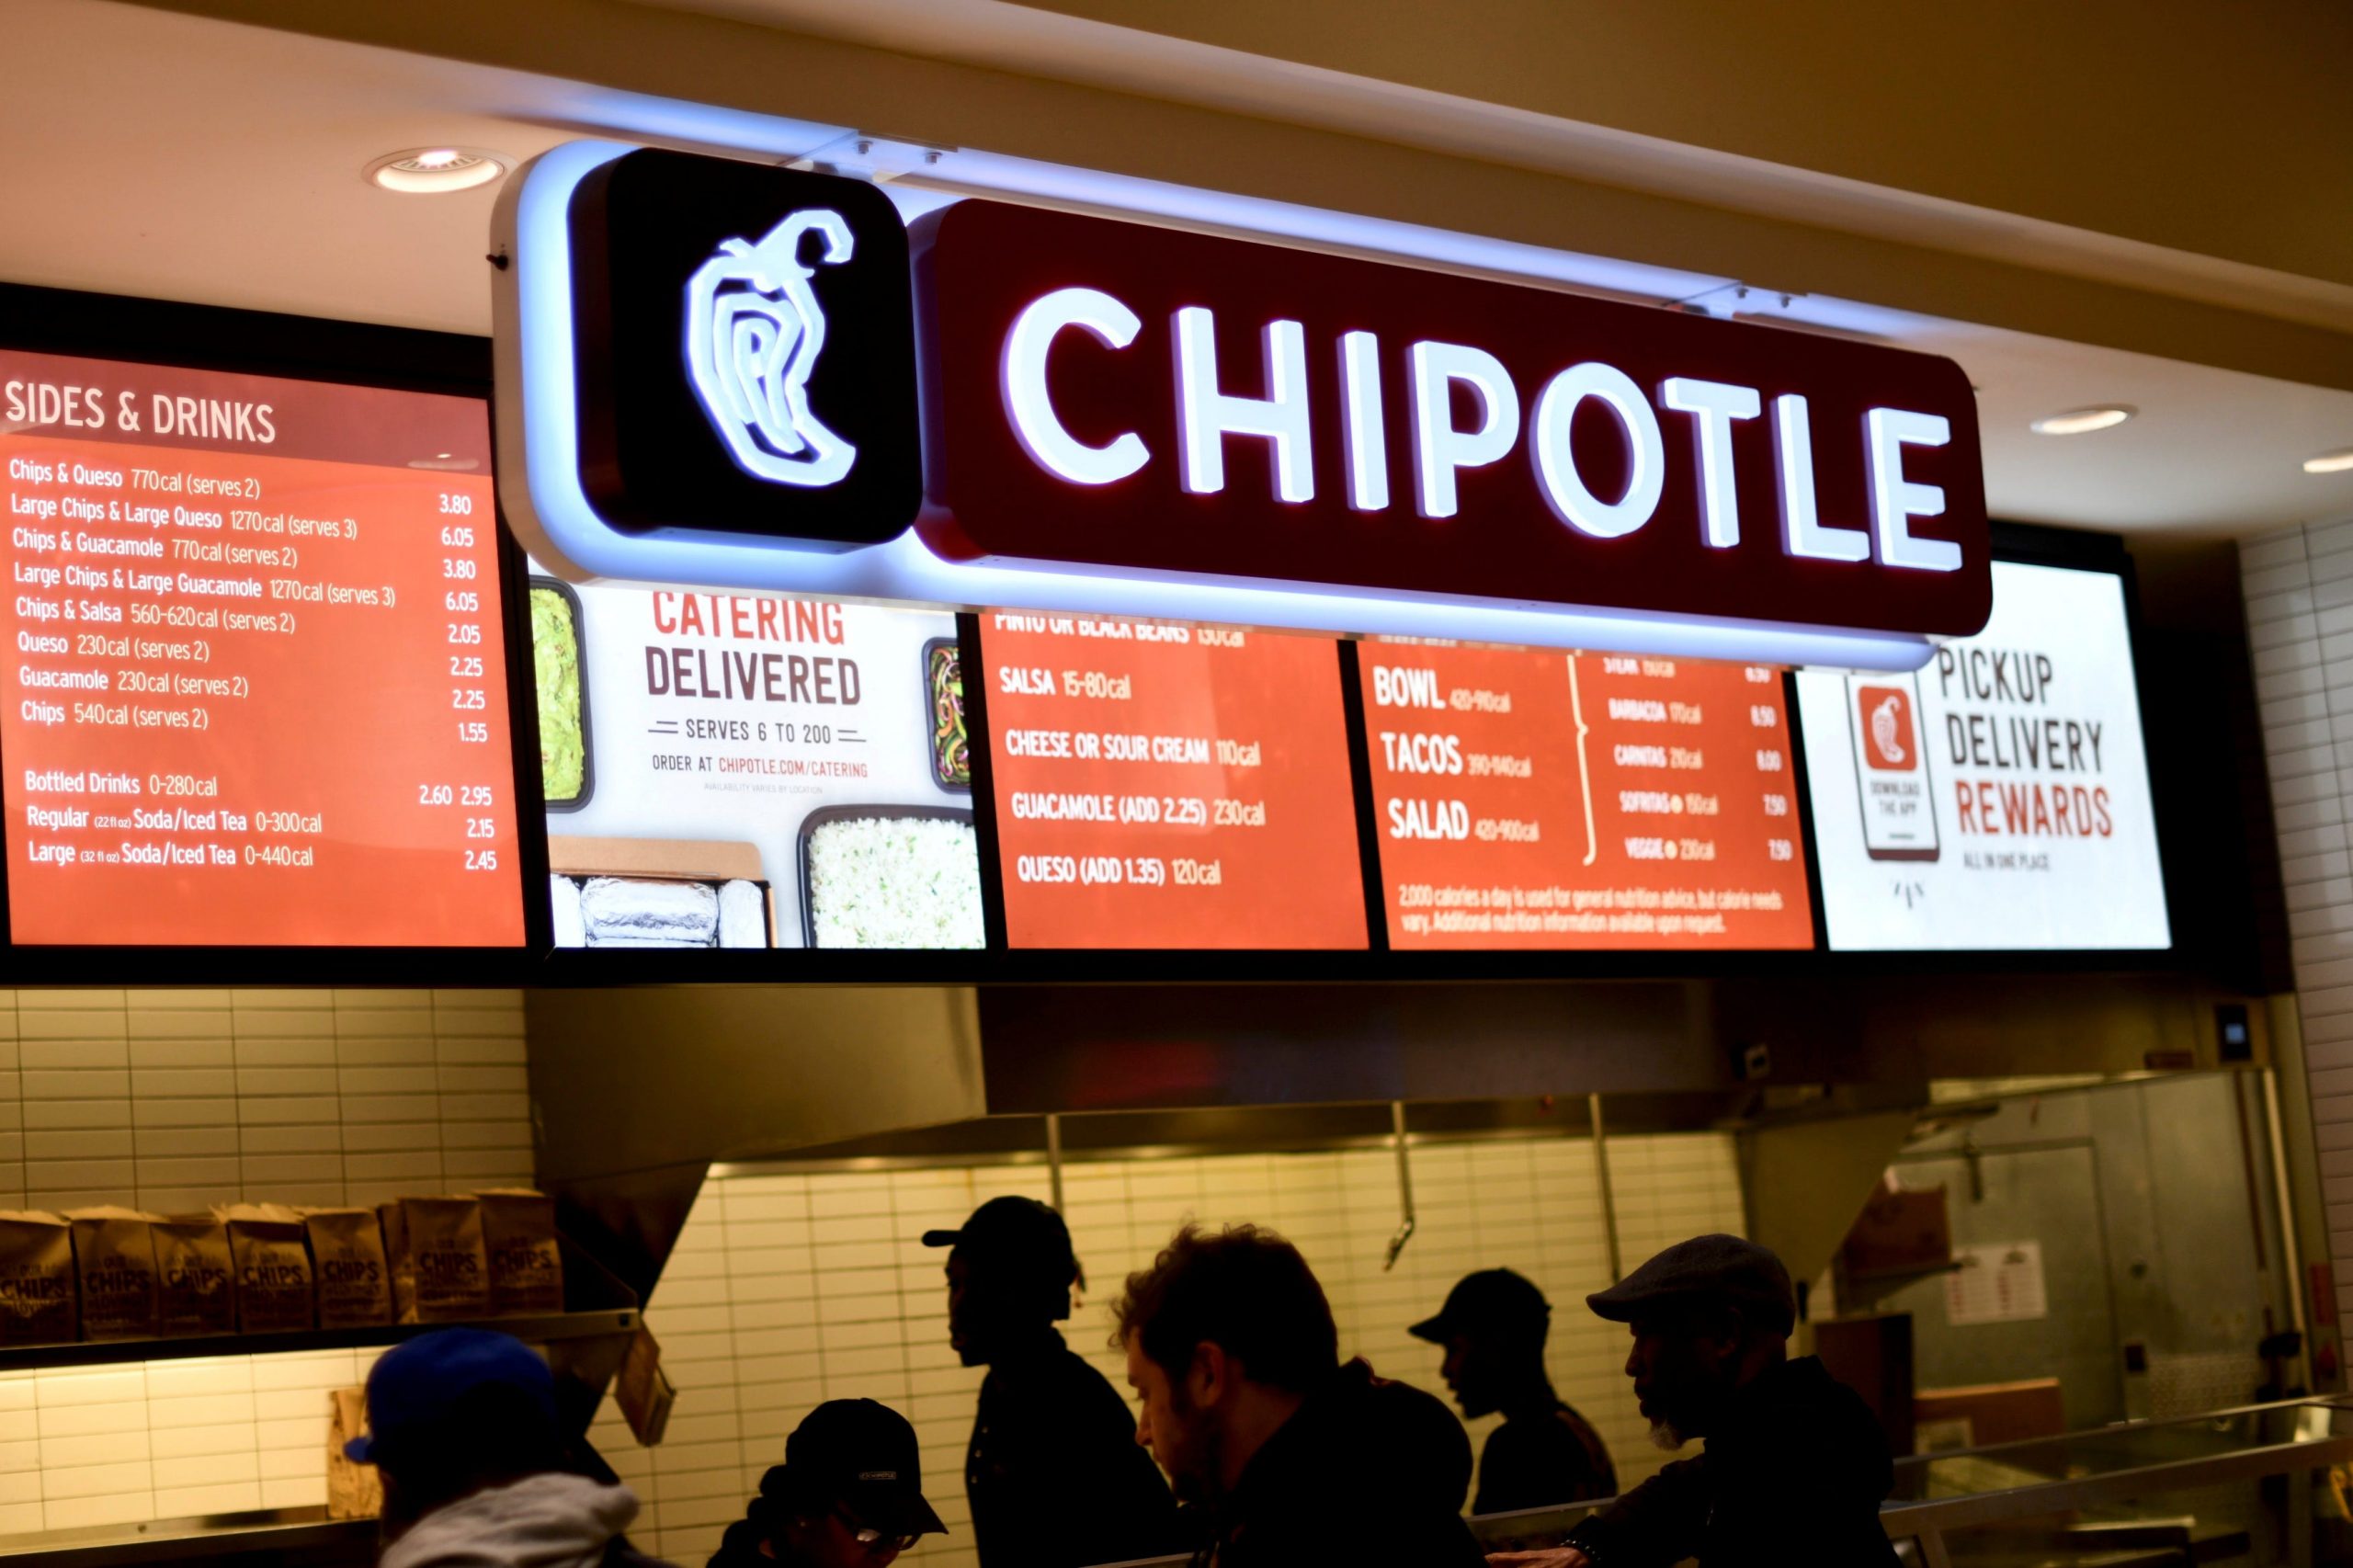 People crowd in front of a fast-food counter with a lighted Chipotle sign